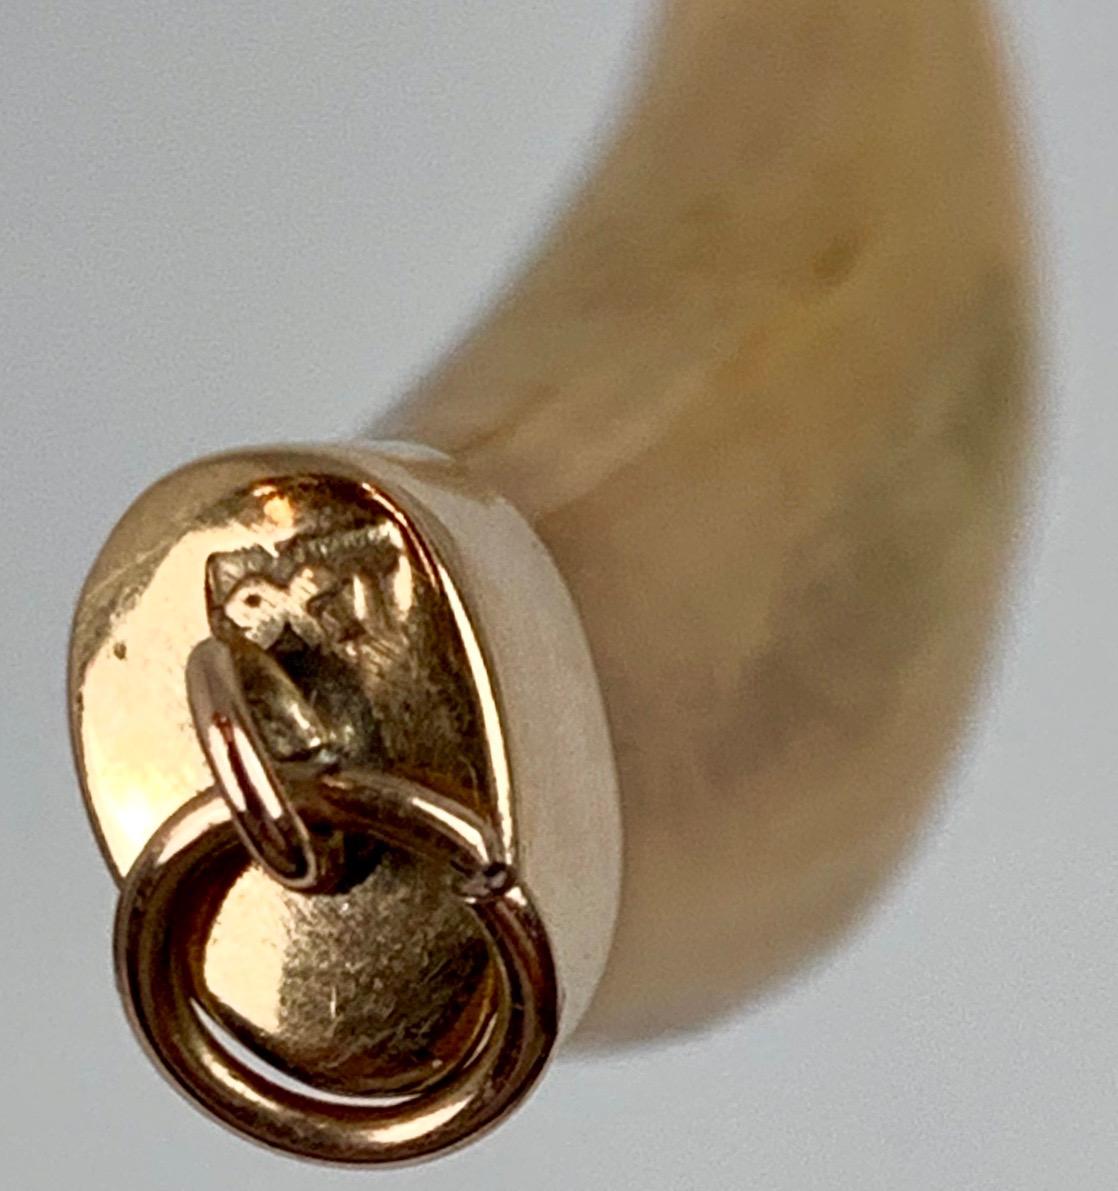 English Victorian lion's tooth mounted in 9 carat gold with a loop for hanging on a chain or cord.